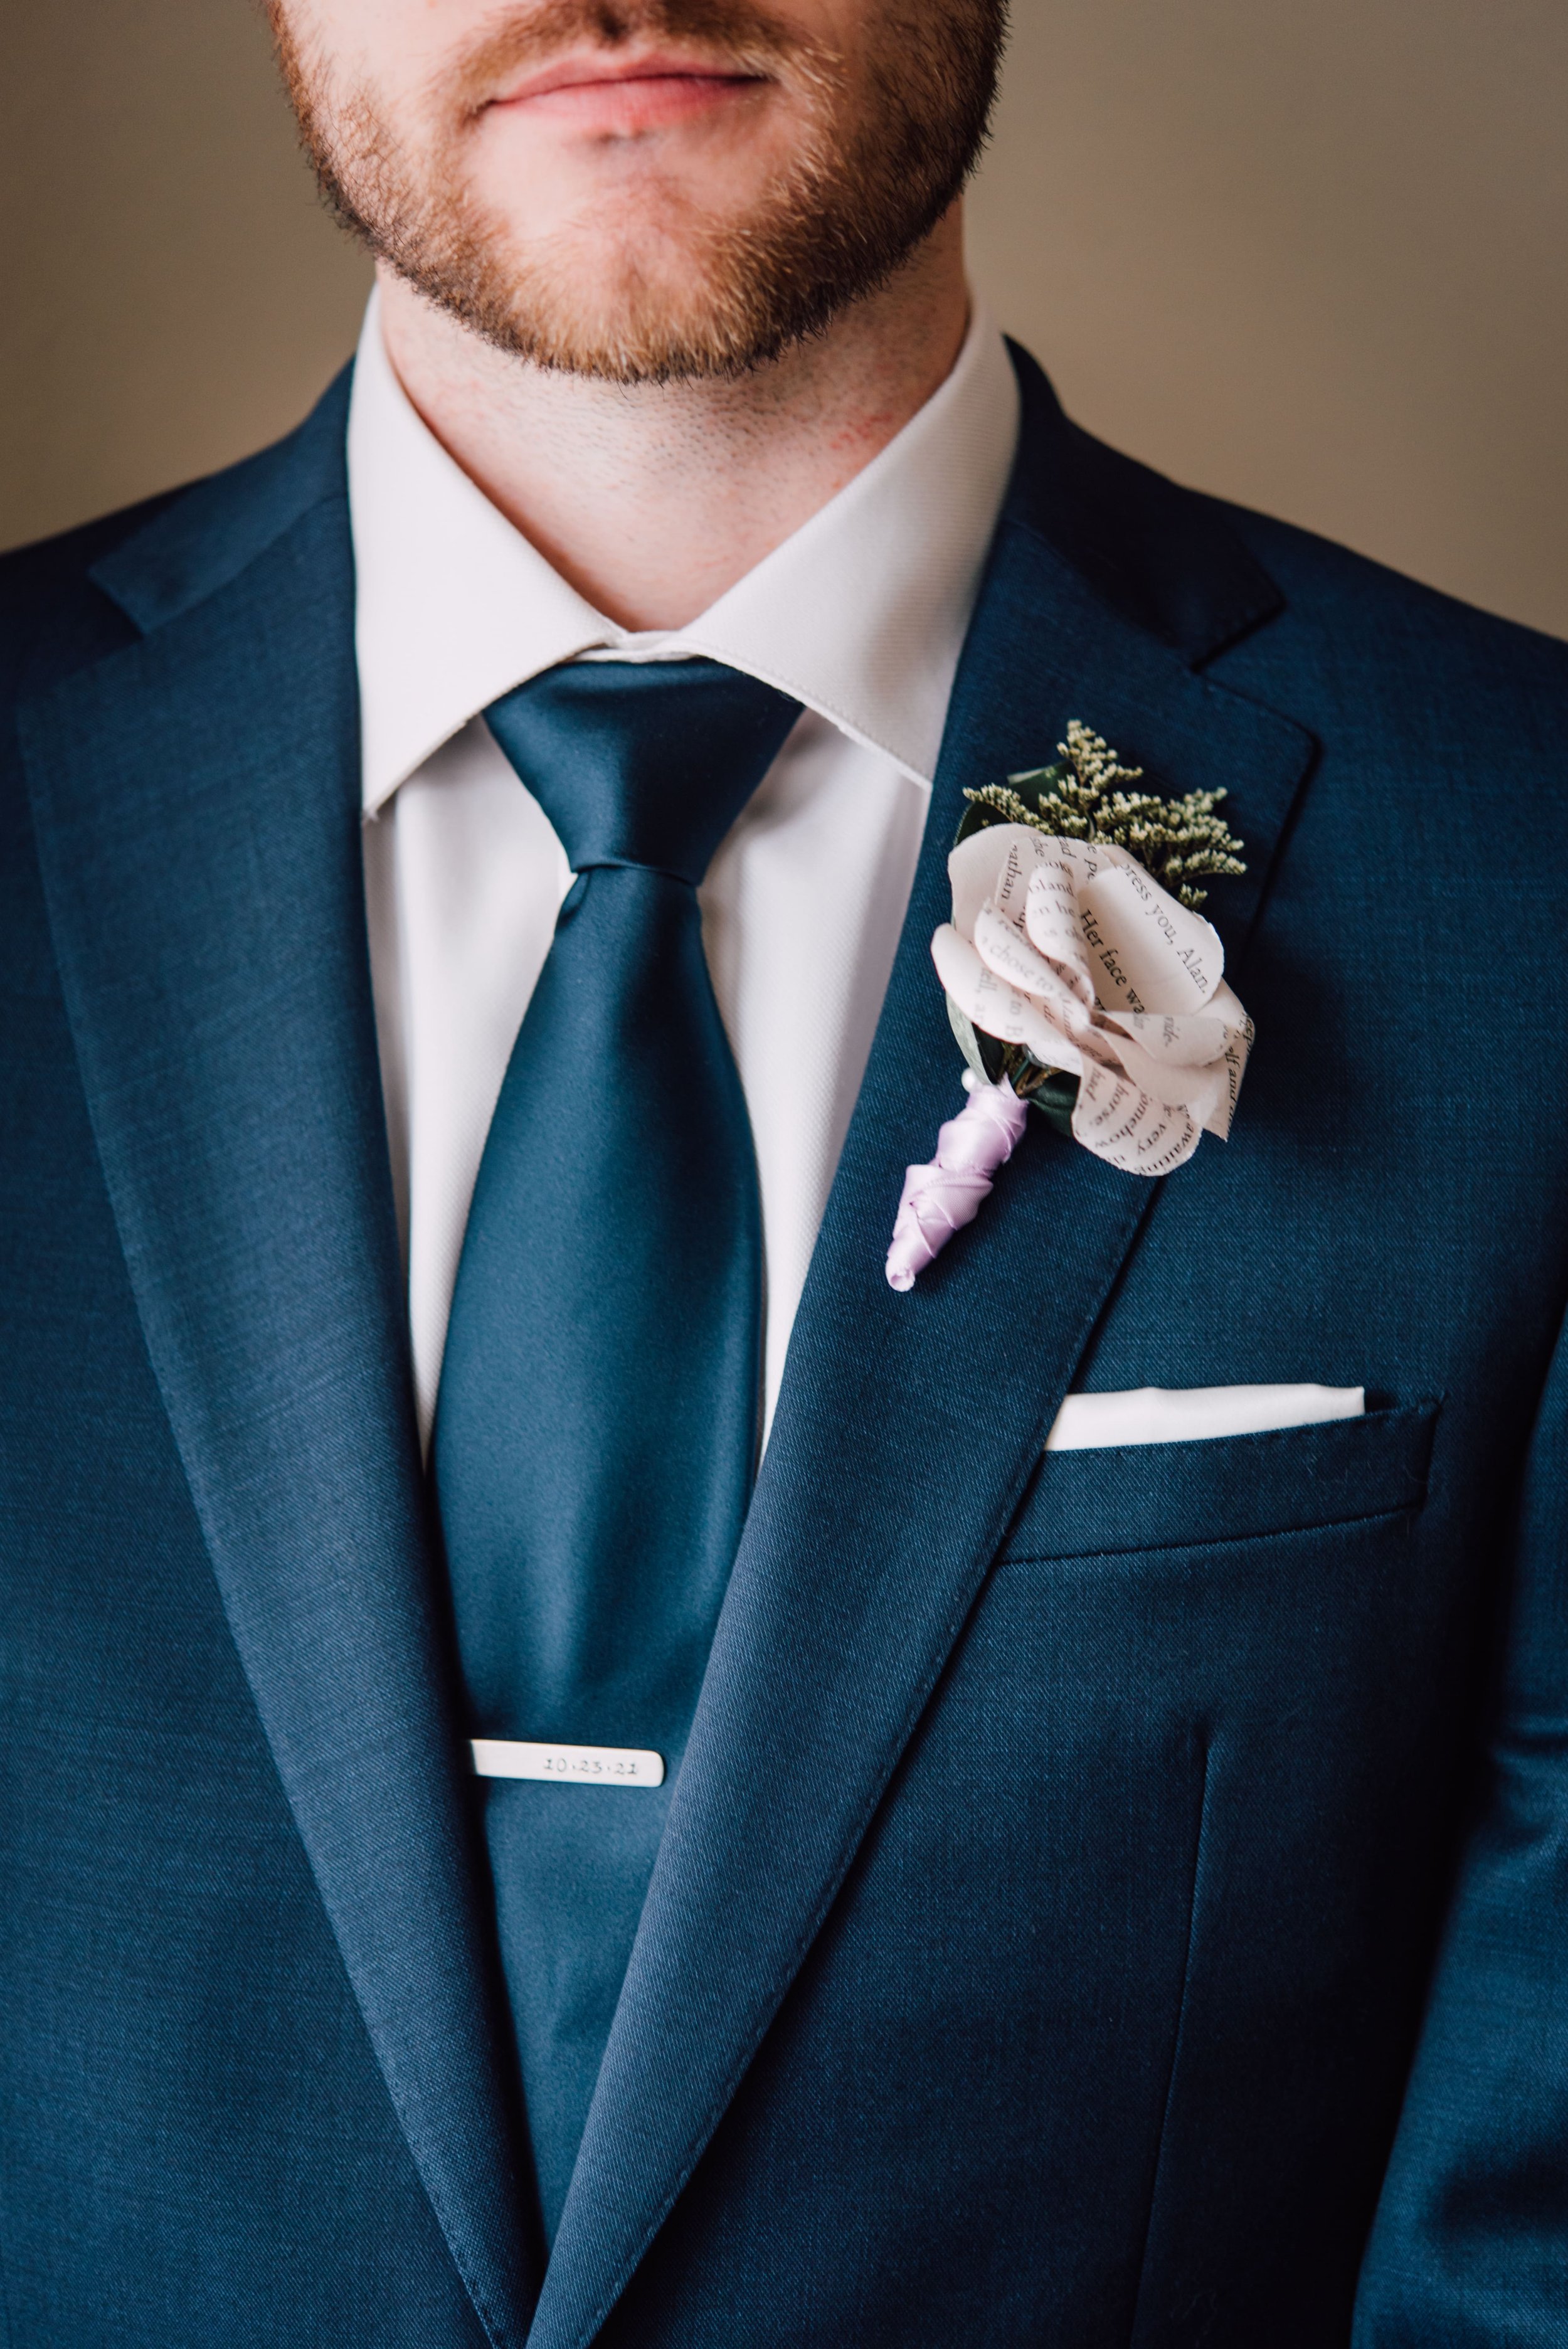  a photo of the grooms paper wedding flowers boutonniere and tie  